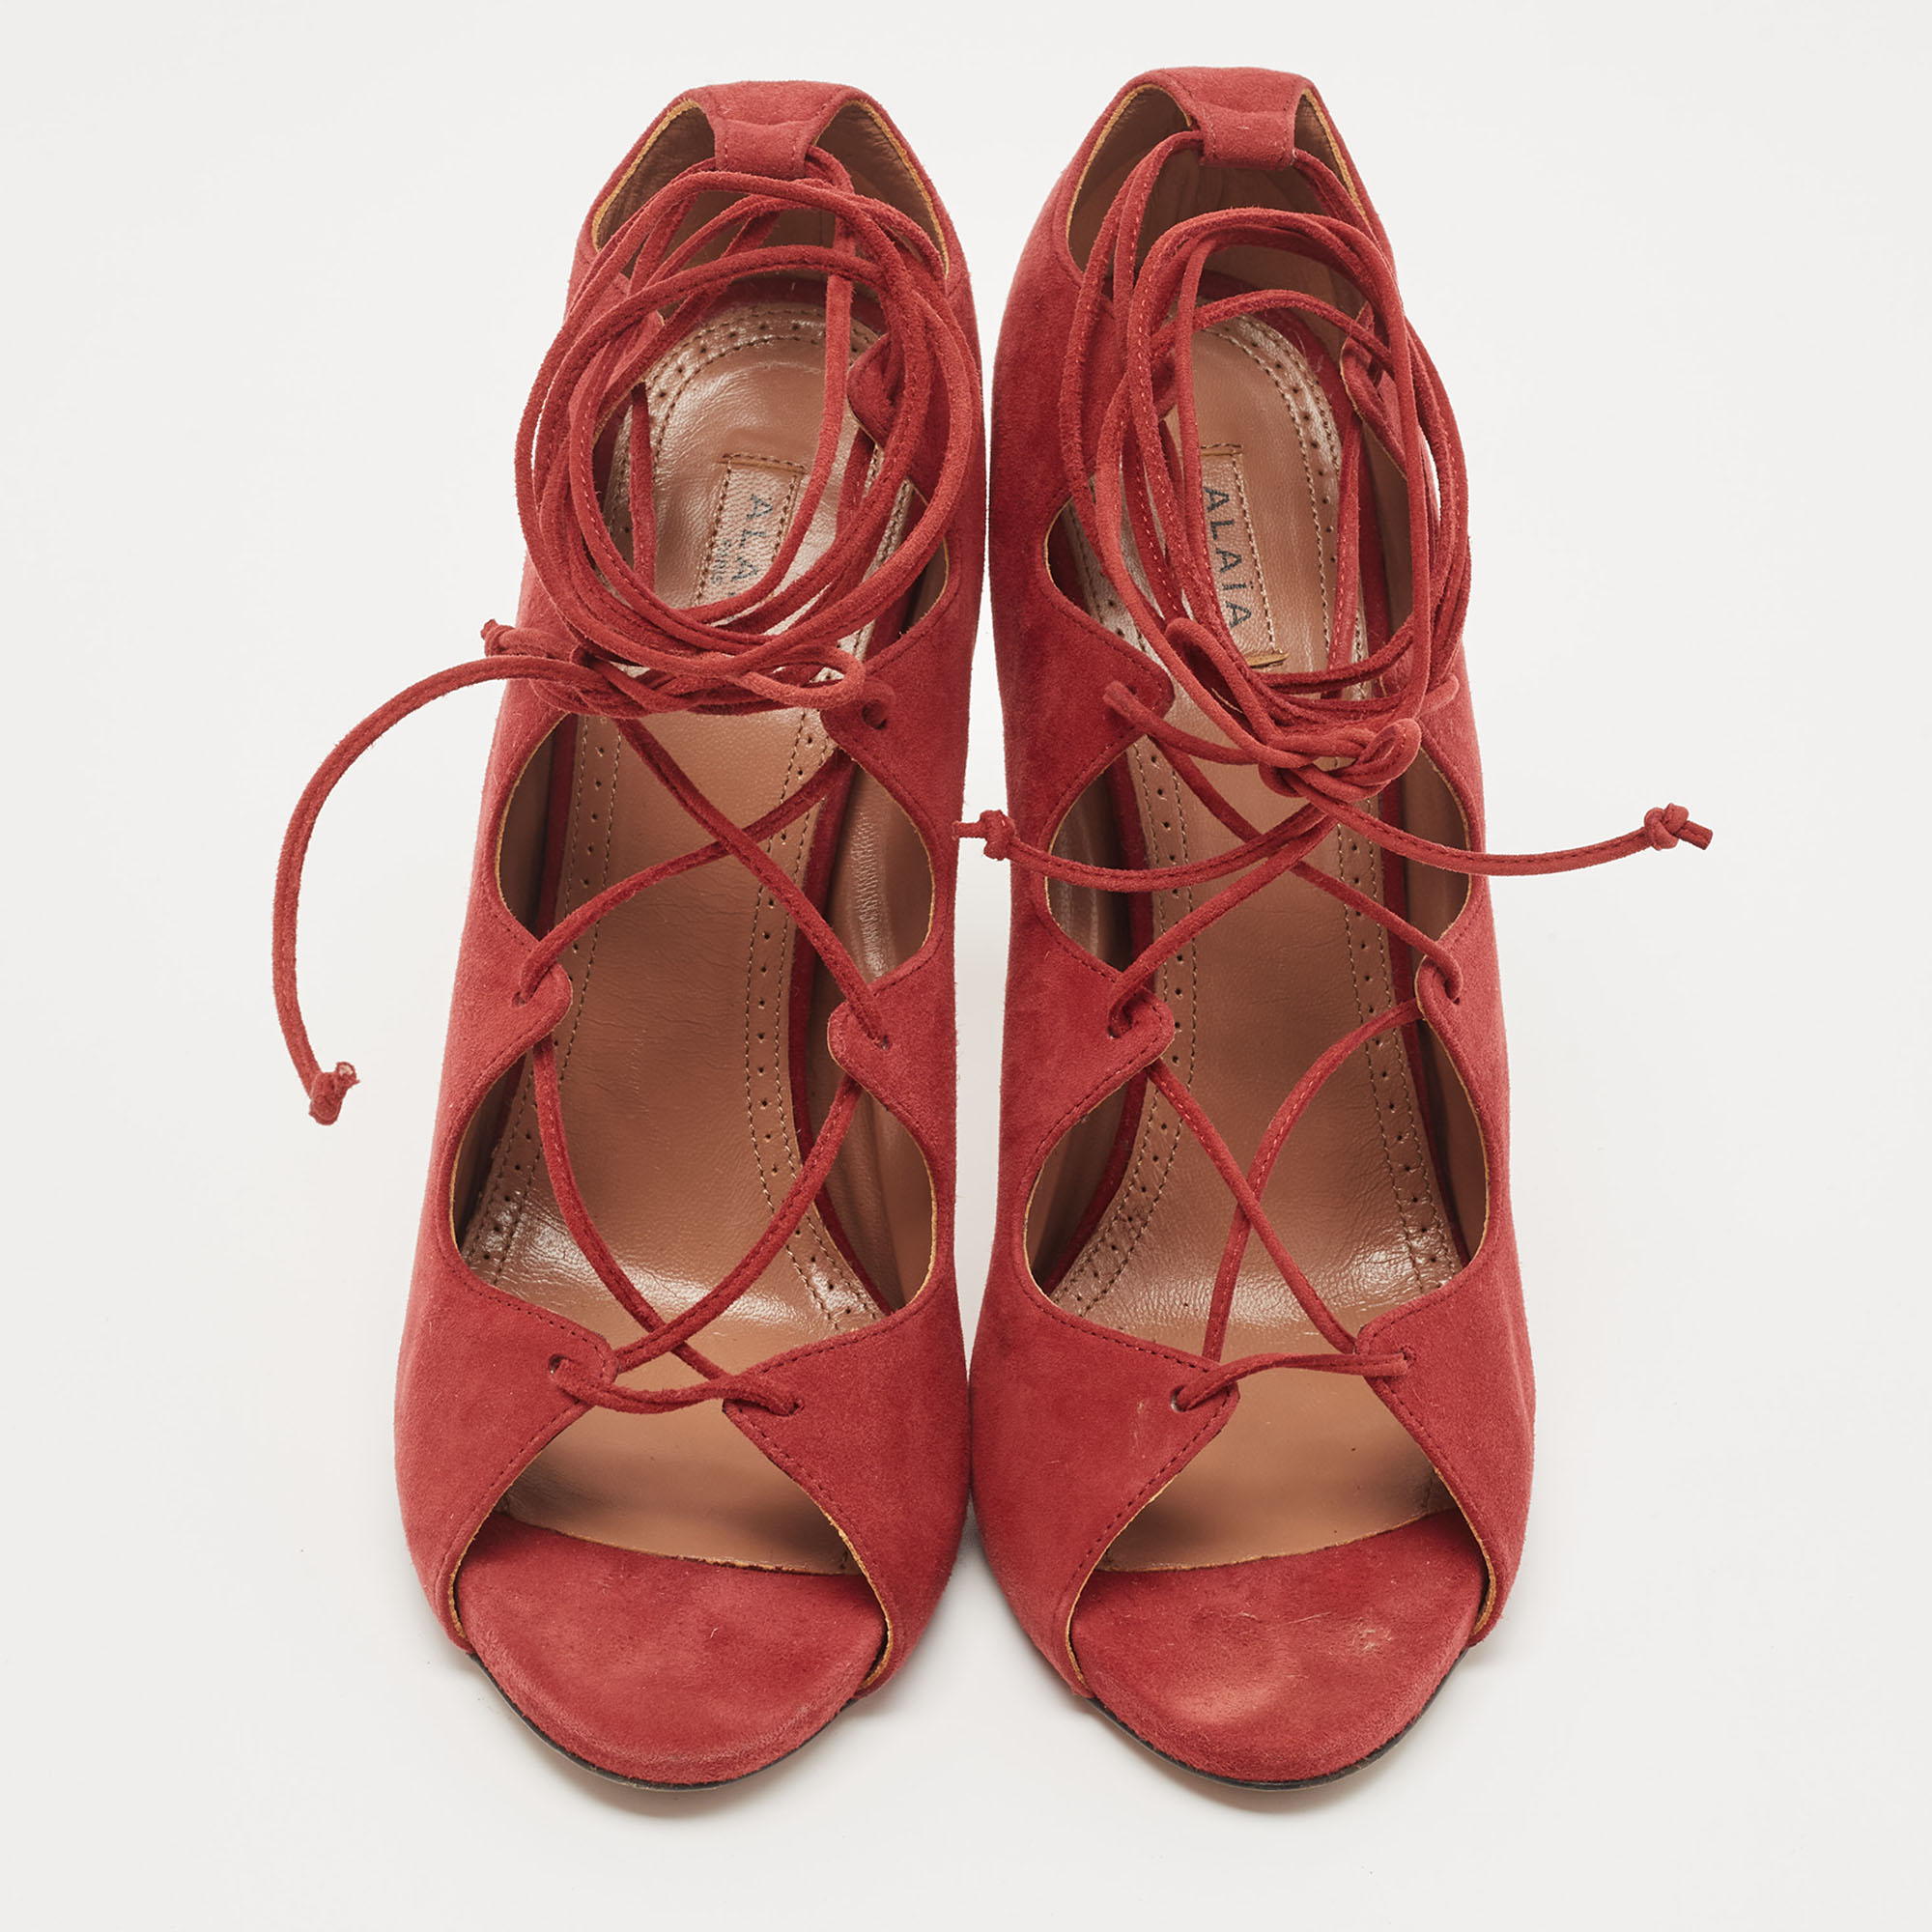 Alaia Red Suede Lace Up Pumps Size 39